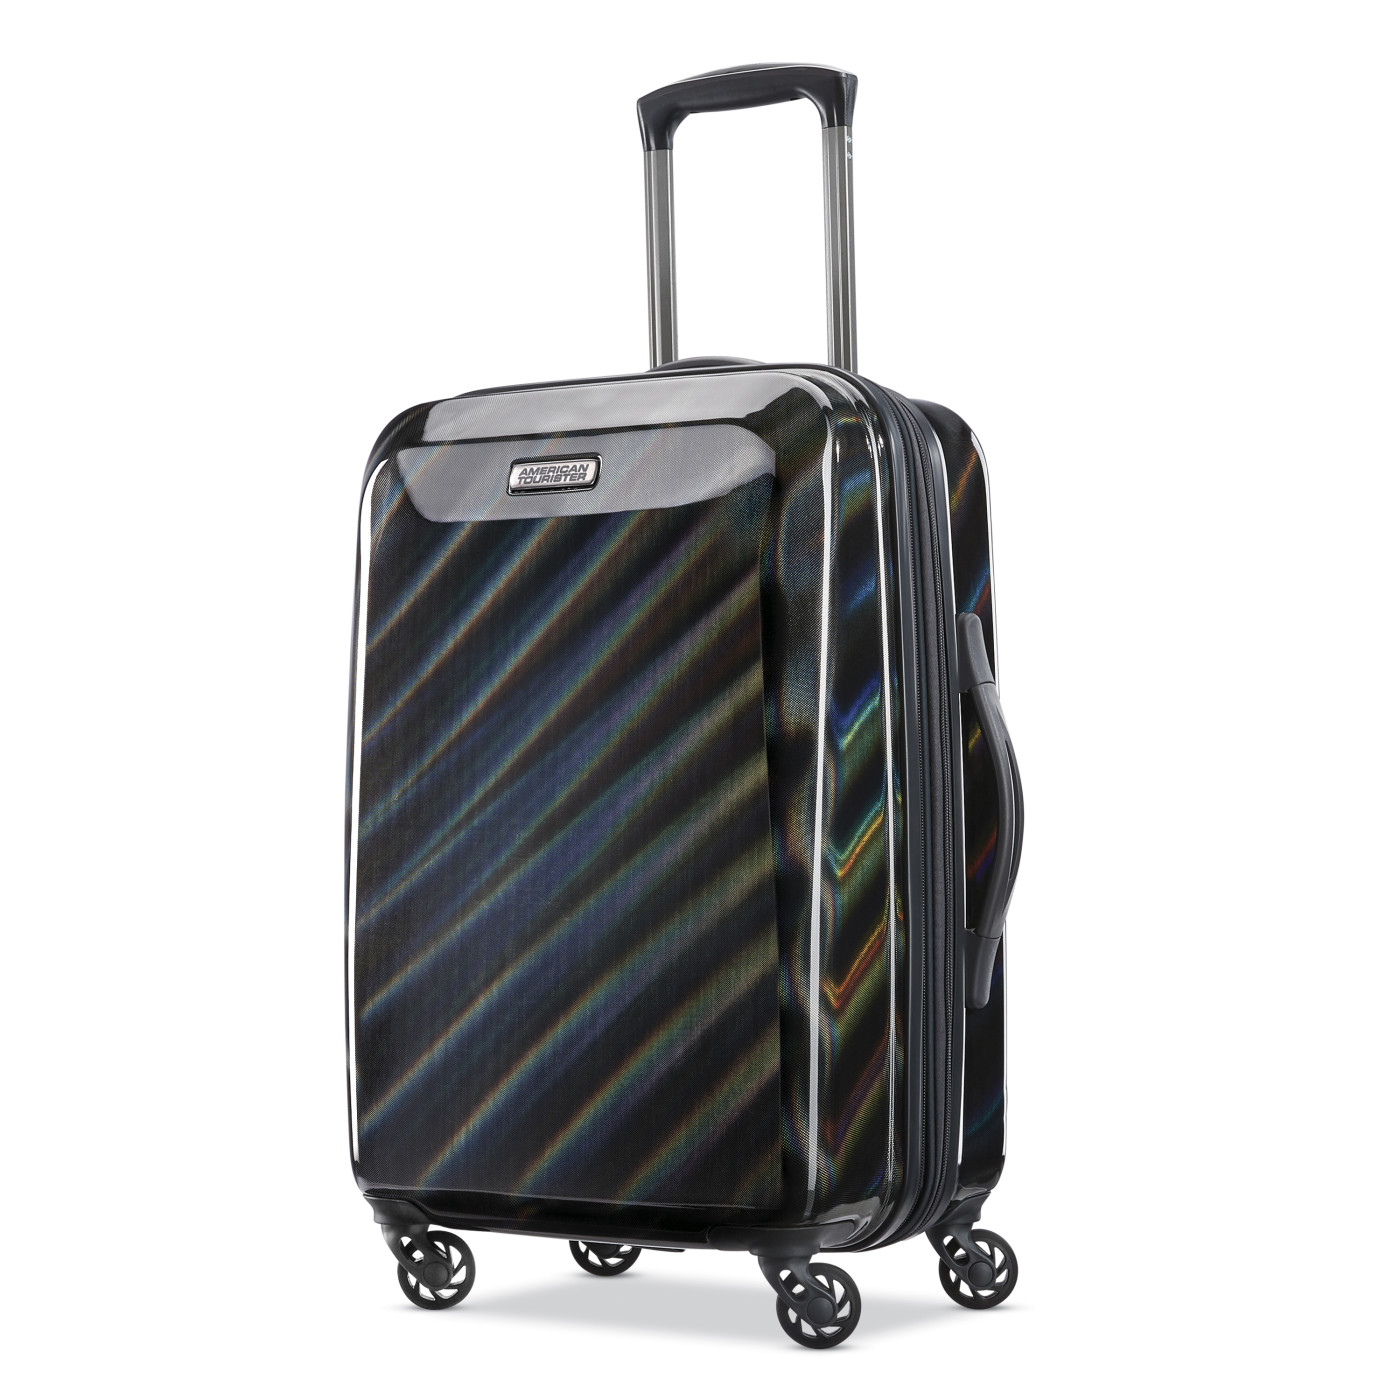 American Tourister® 101812 - Moonlight 21" Carry-on Spinner